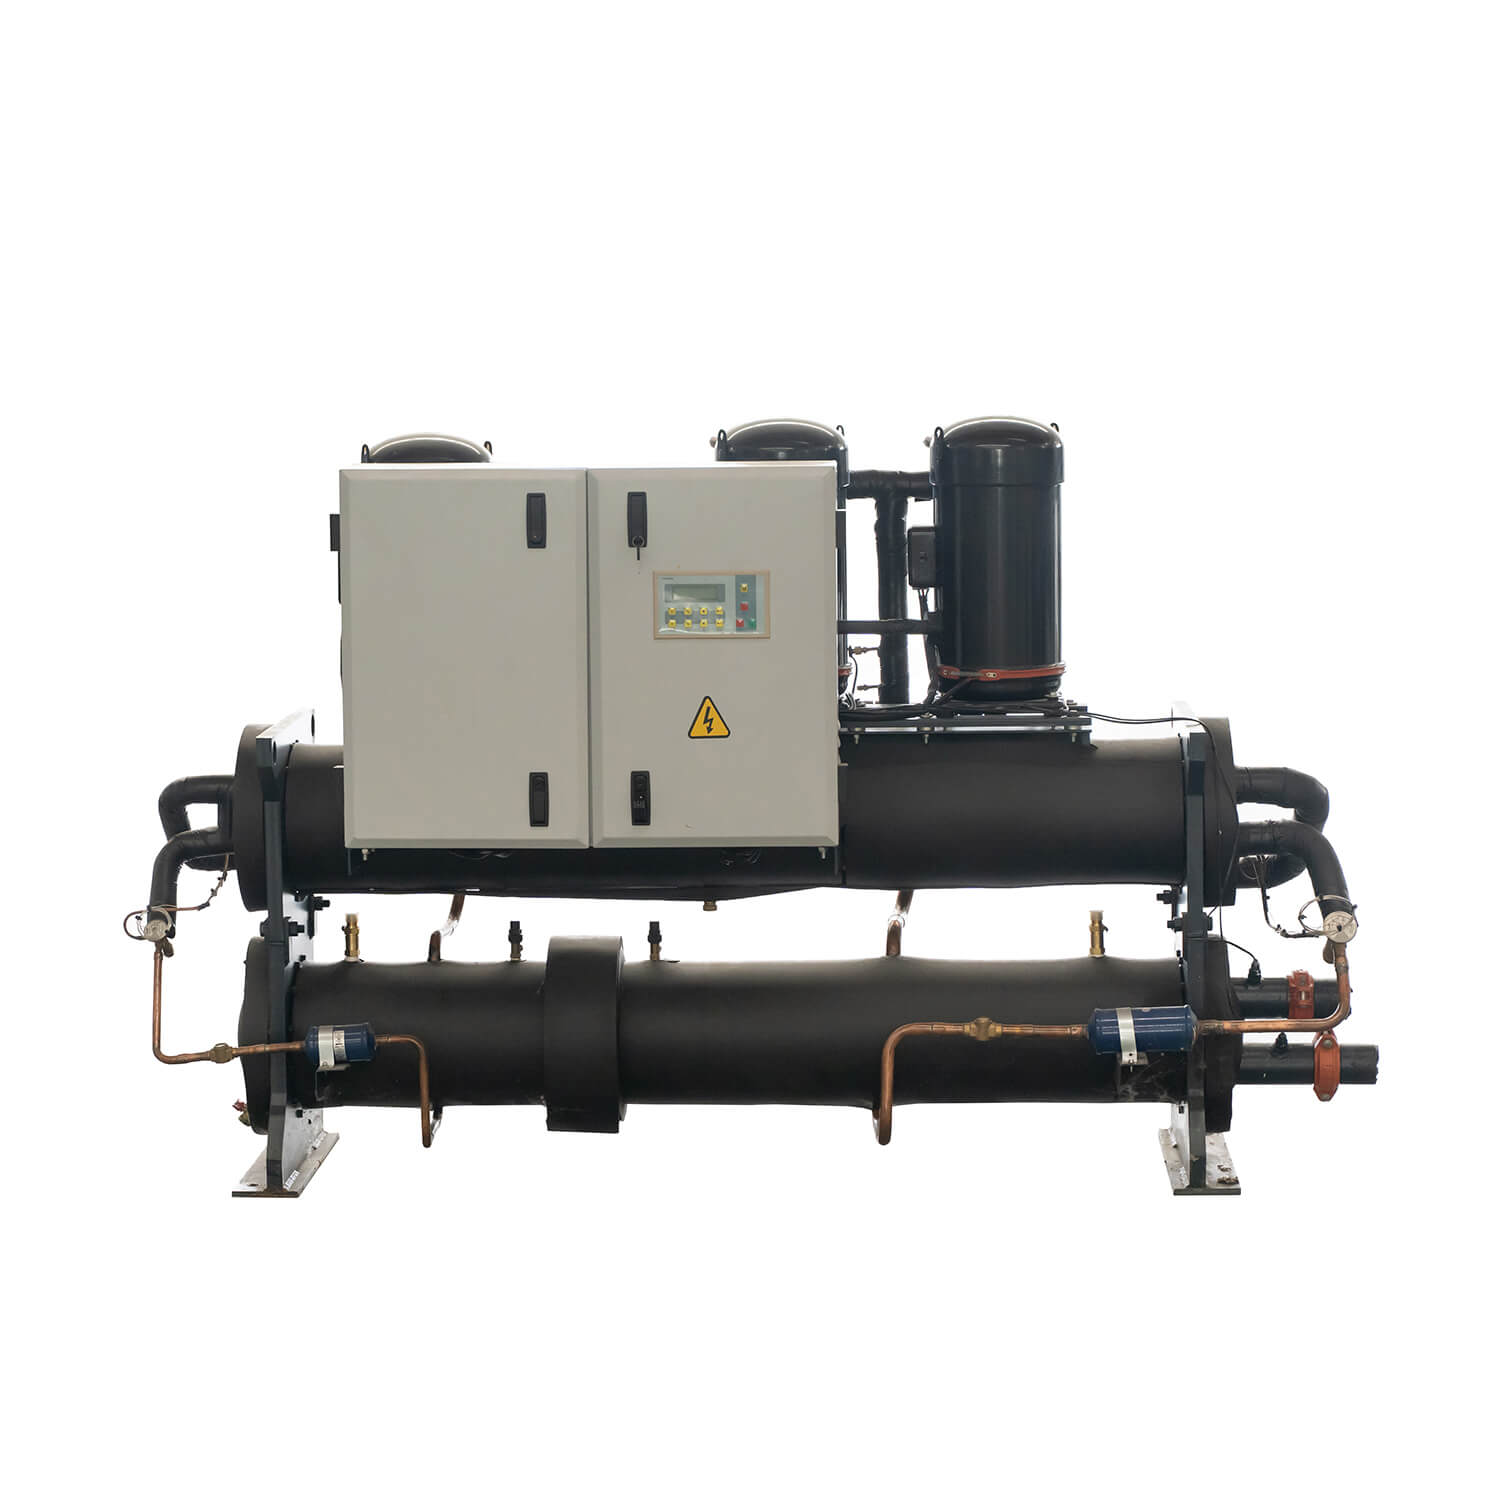 70kw-280kw Water Cooled Scroll Chiller and Heat Pump, Industrial /Commercial Central Air Conditioner